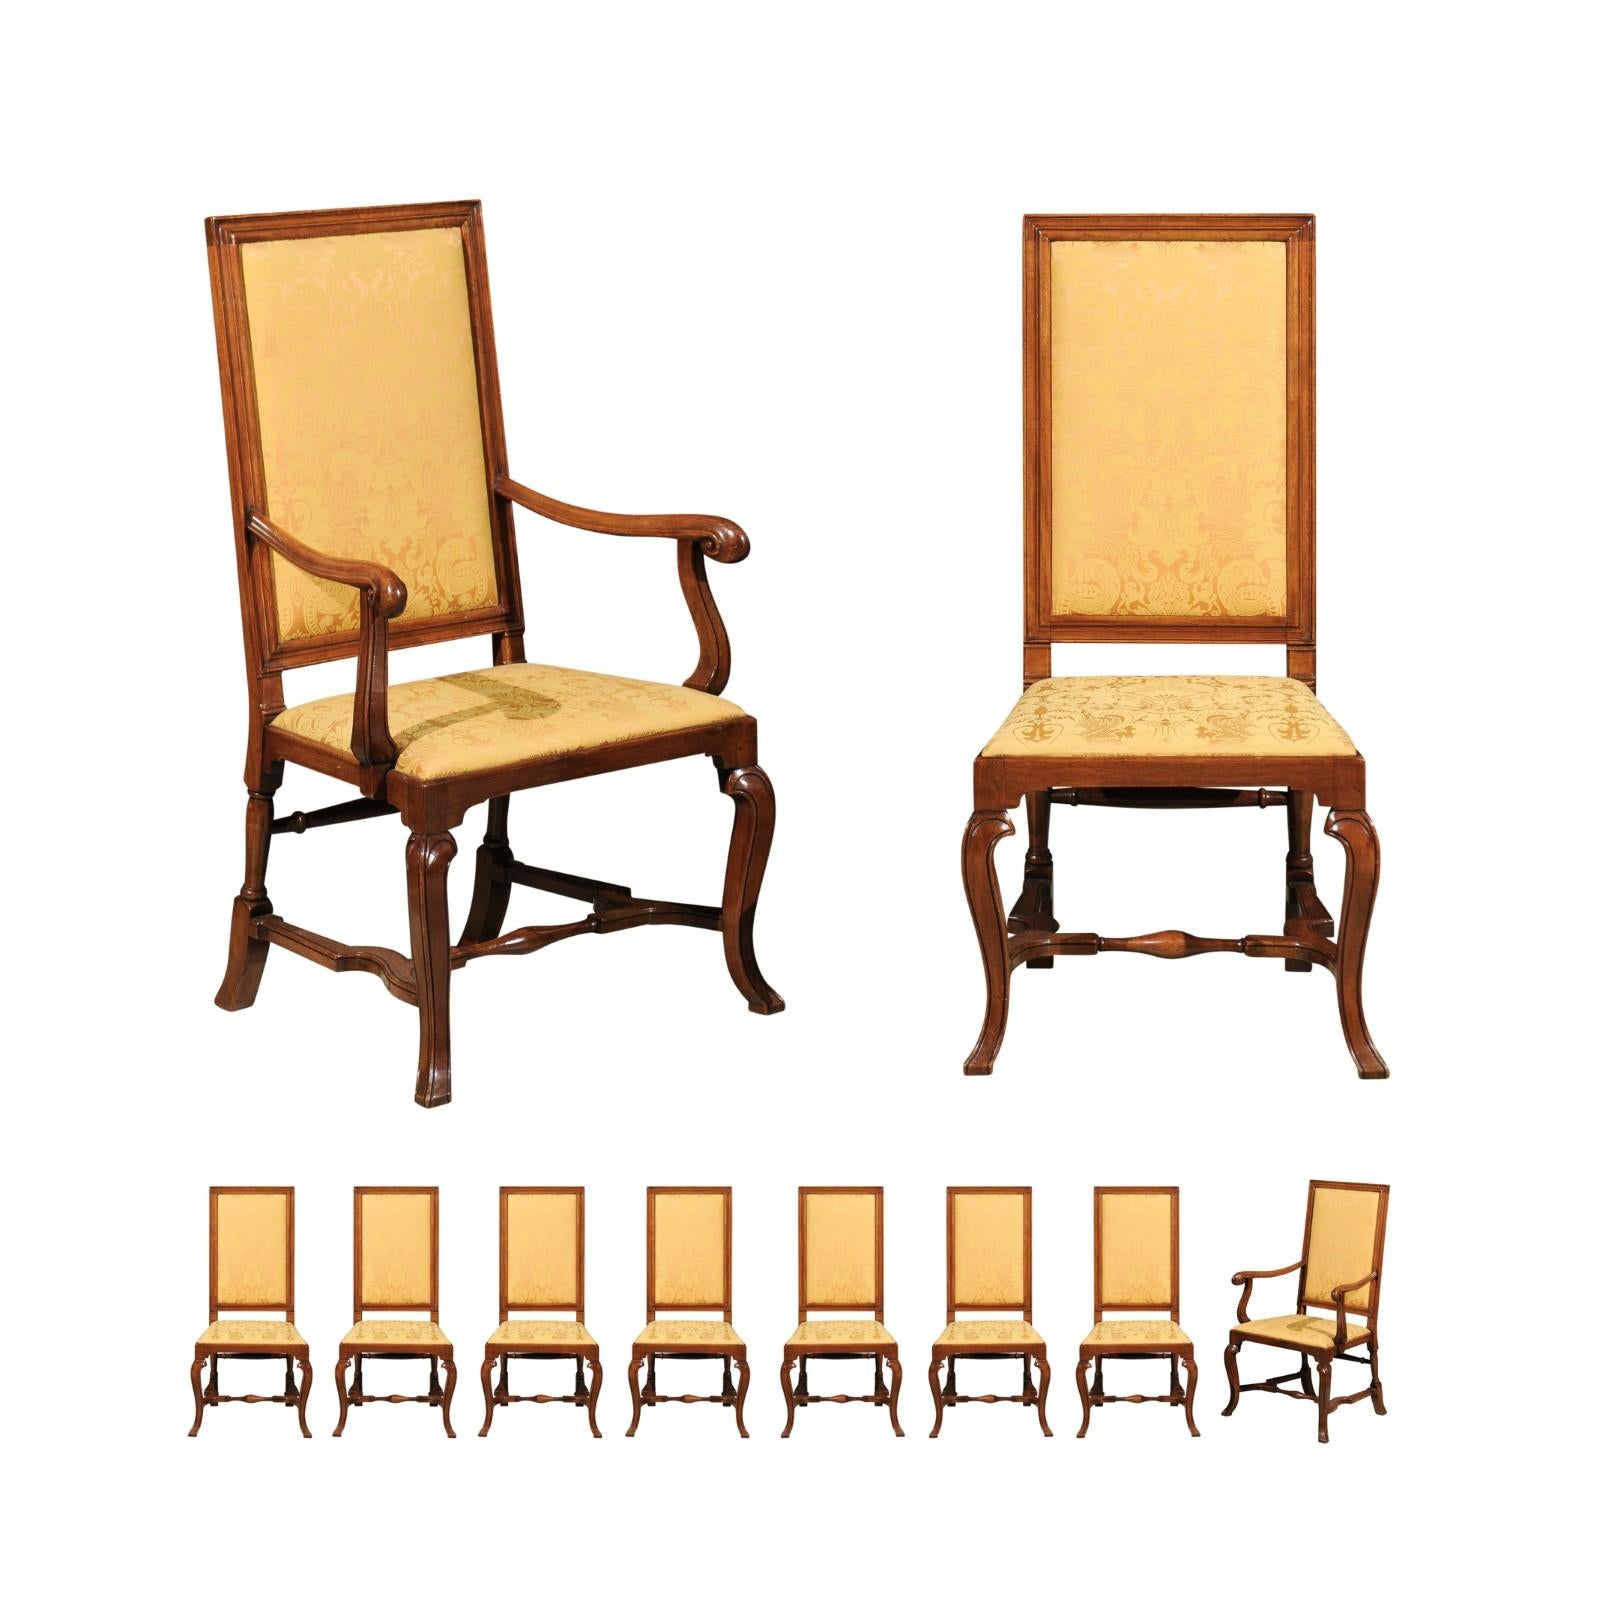 Set of 10 English Queen Anne Style Walnut Dining Chairs